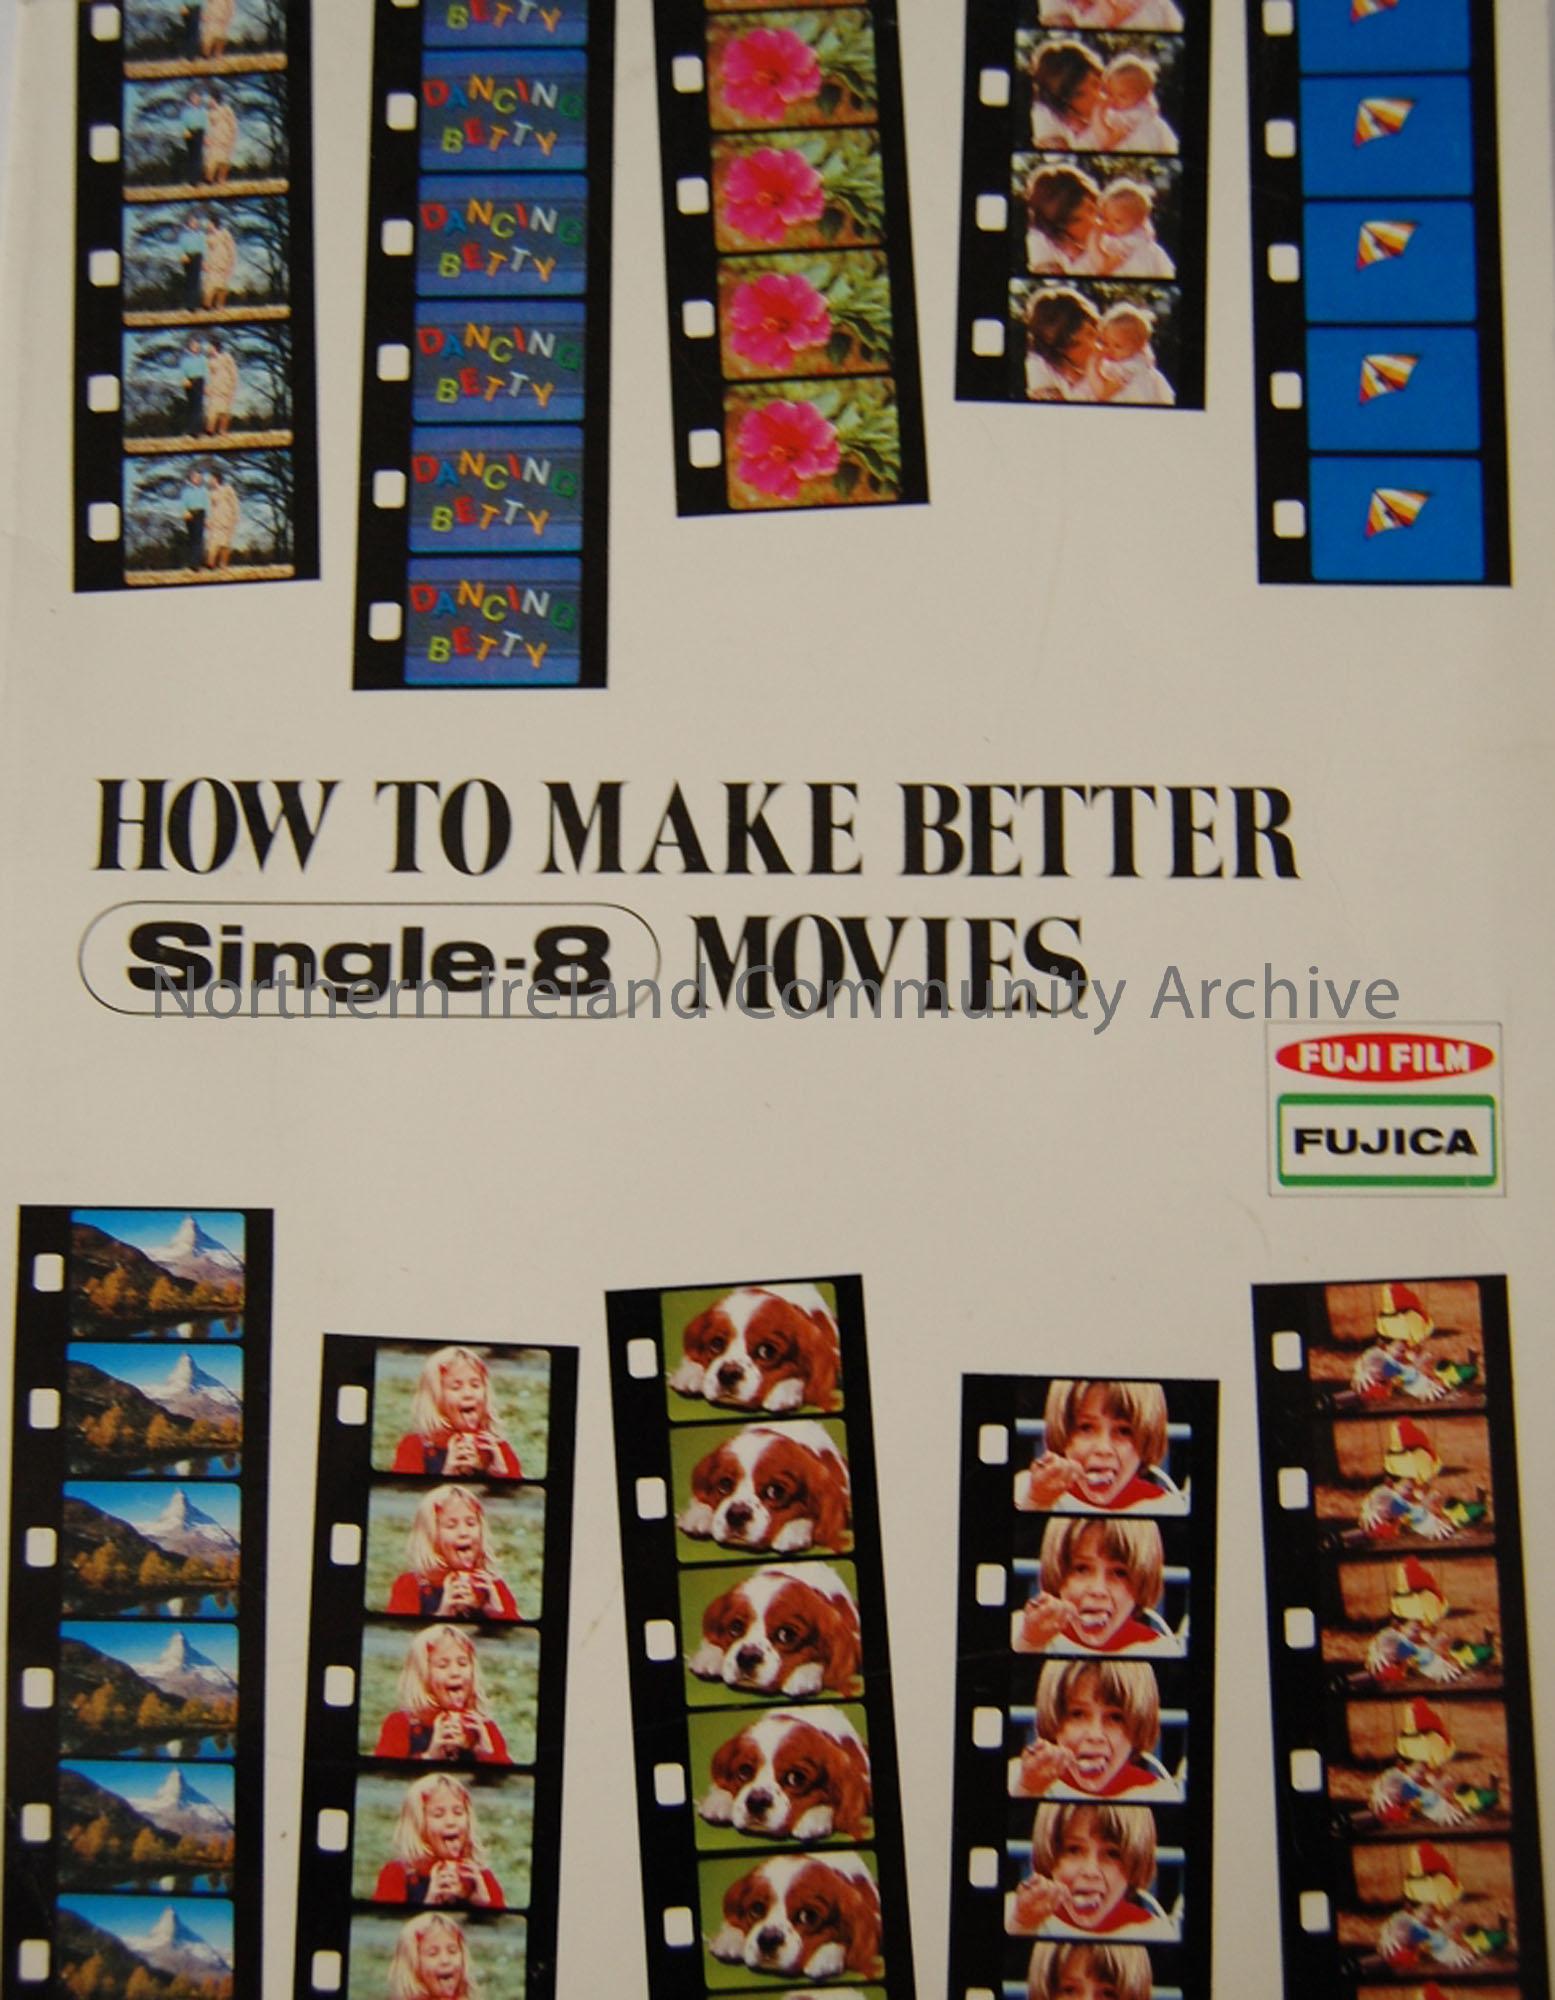 ‘How to make better single-8 movies’